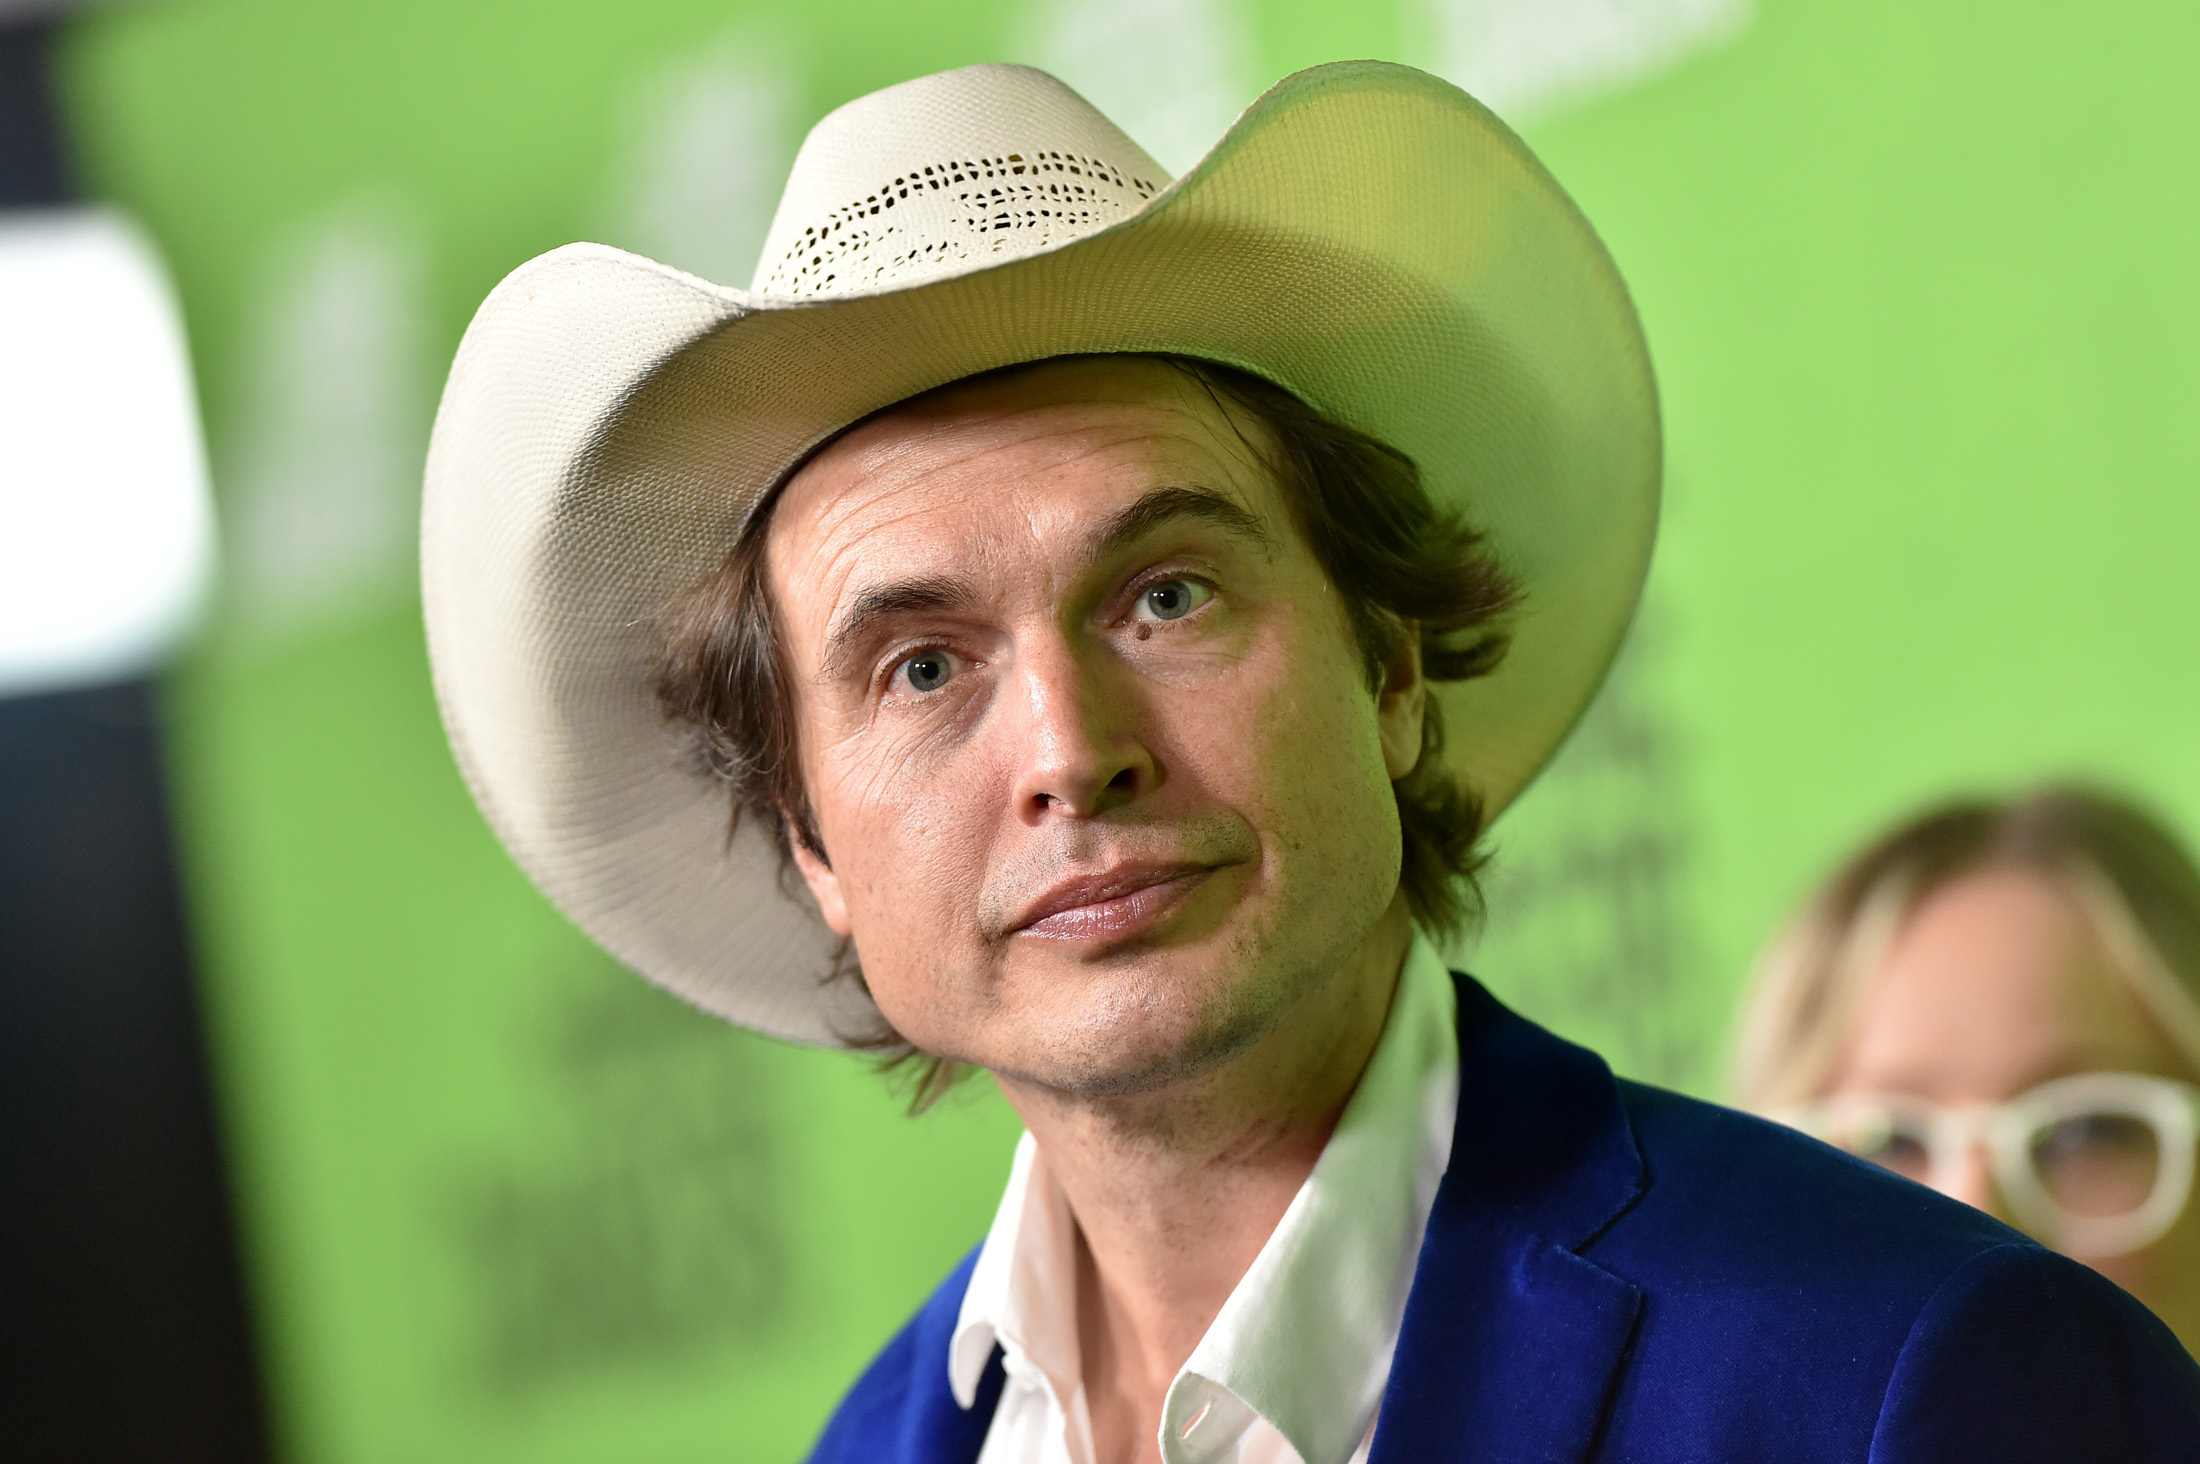 Kimbal Musk attends the Los Angeles Premiere of The Game Changers&nbsp;at ArcLight Hollywood in, 2019.